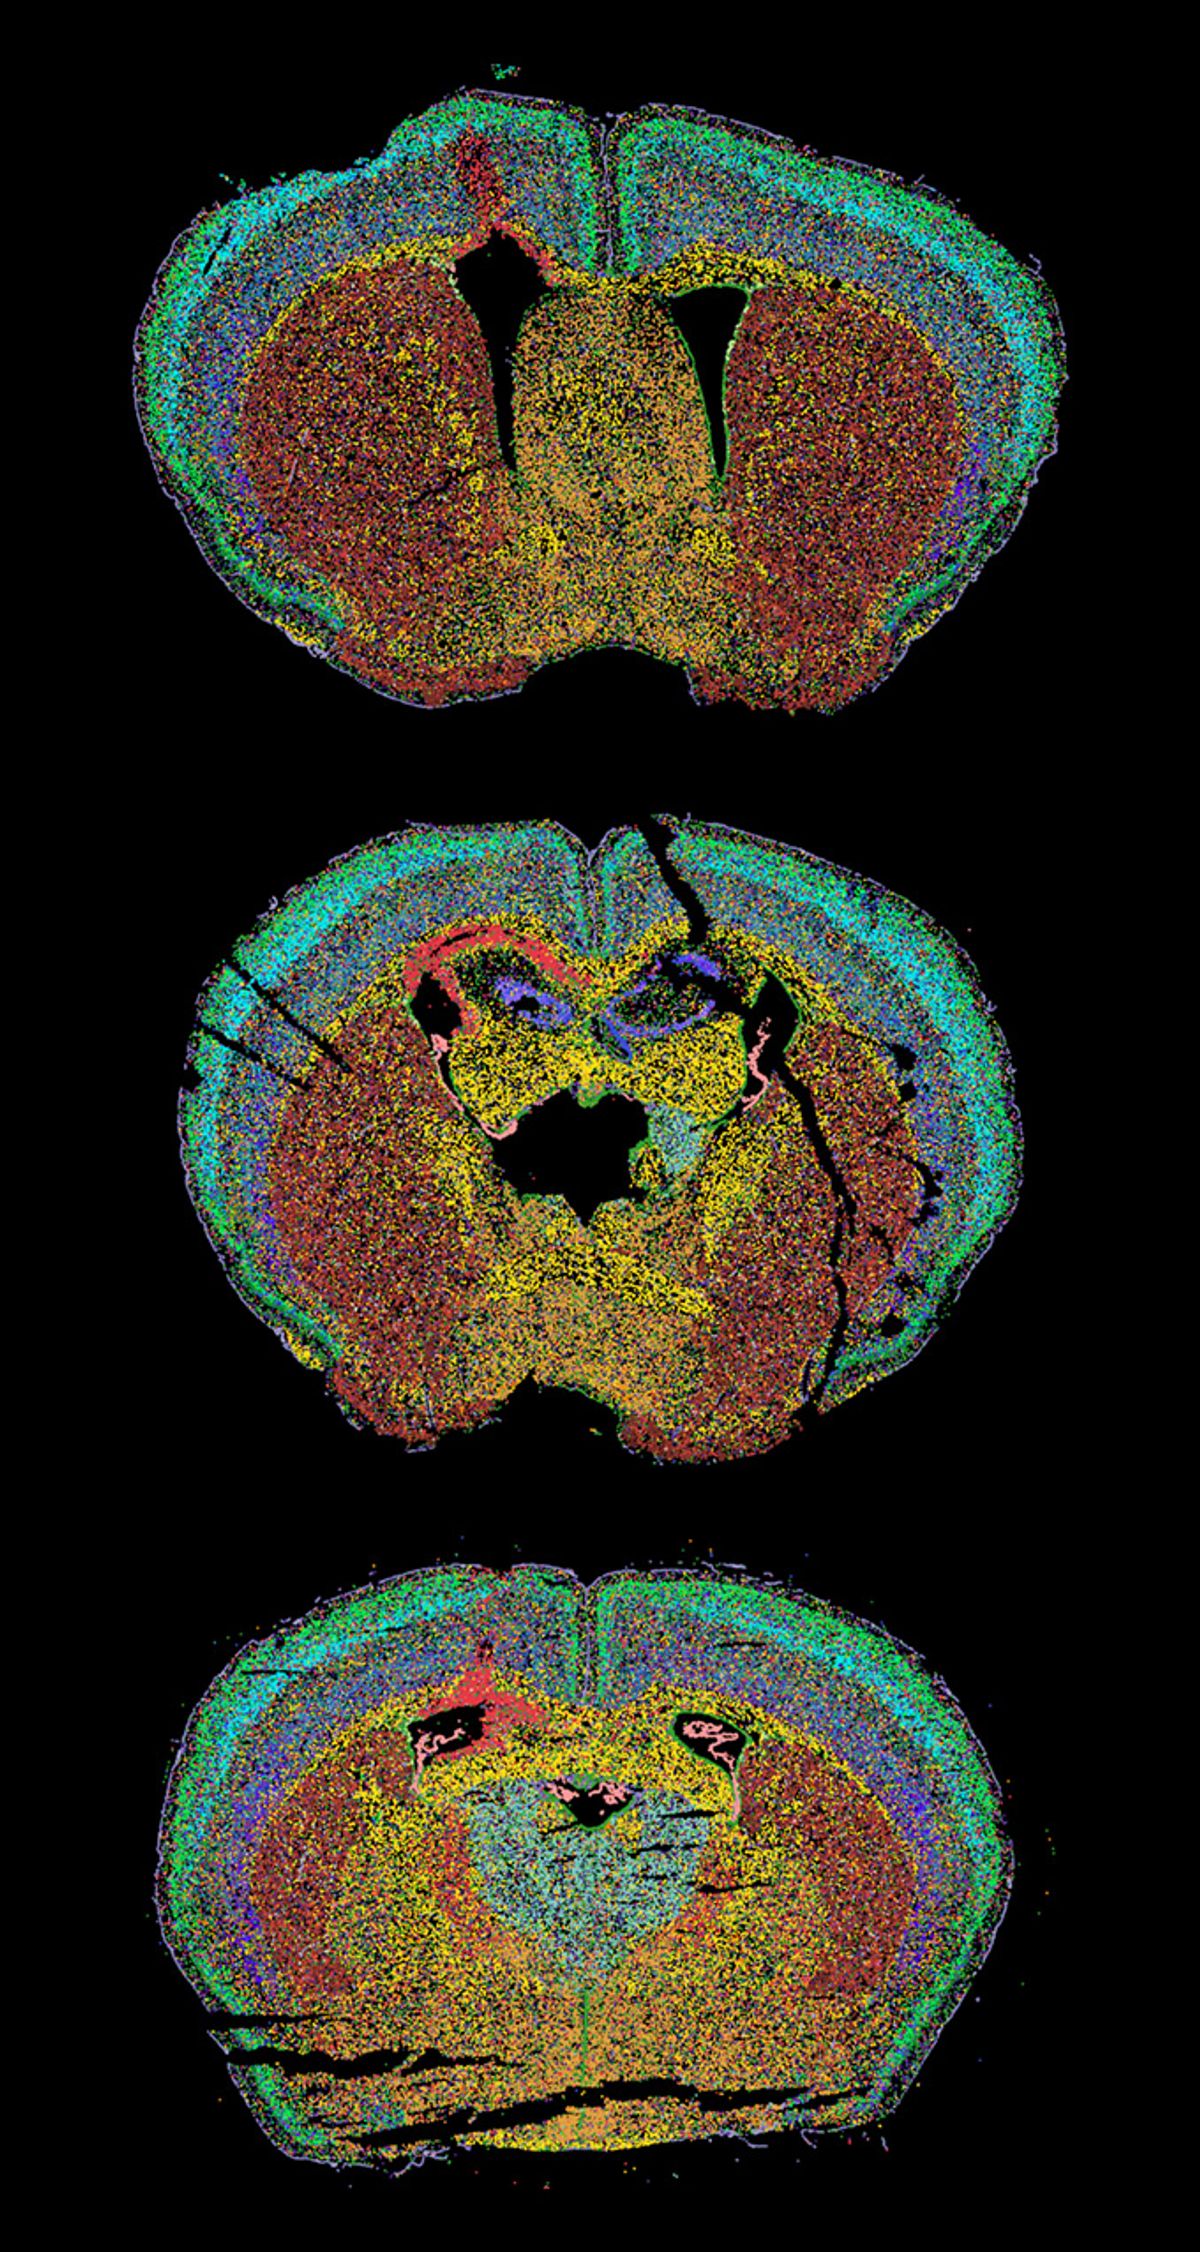 A global map of a mouse brain made with spatial transcriptomics-correlated electron microscopy (STcEM). The map depicts areas of demyelinating injury, specifically in bright red at the top left where a congregation of microglia cells accumulate at the lesion site. Nearby colors indicate other cell types such as oligodendrocytes (yellow), astrocytes (green), and vascular cells (violet), which all play intricate roles in the ailing brain.